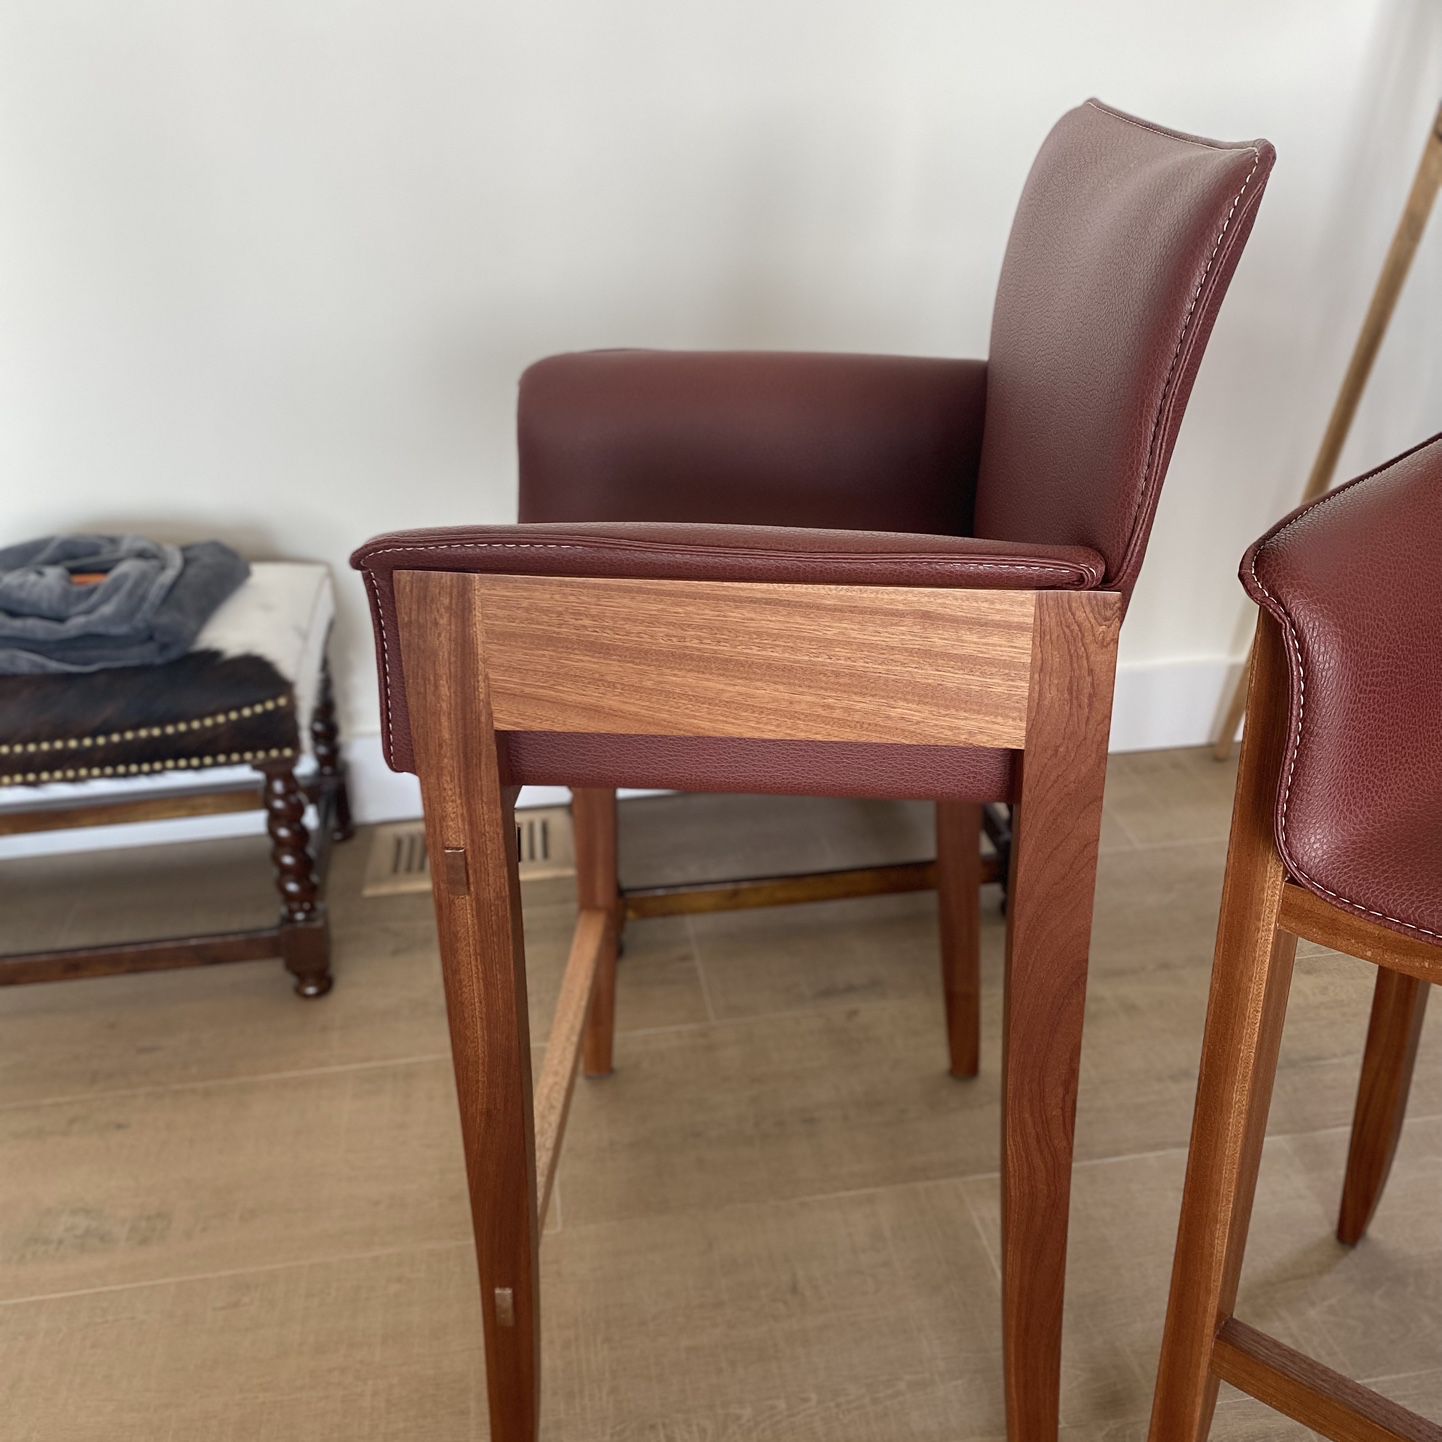 4 Genuine Leather Counter Stools